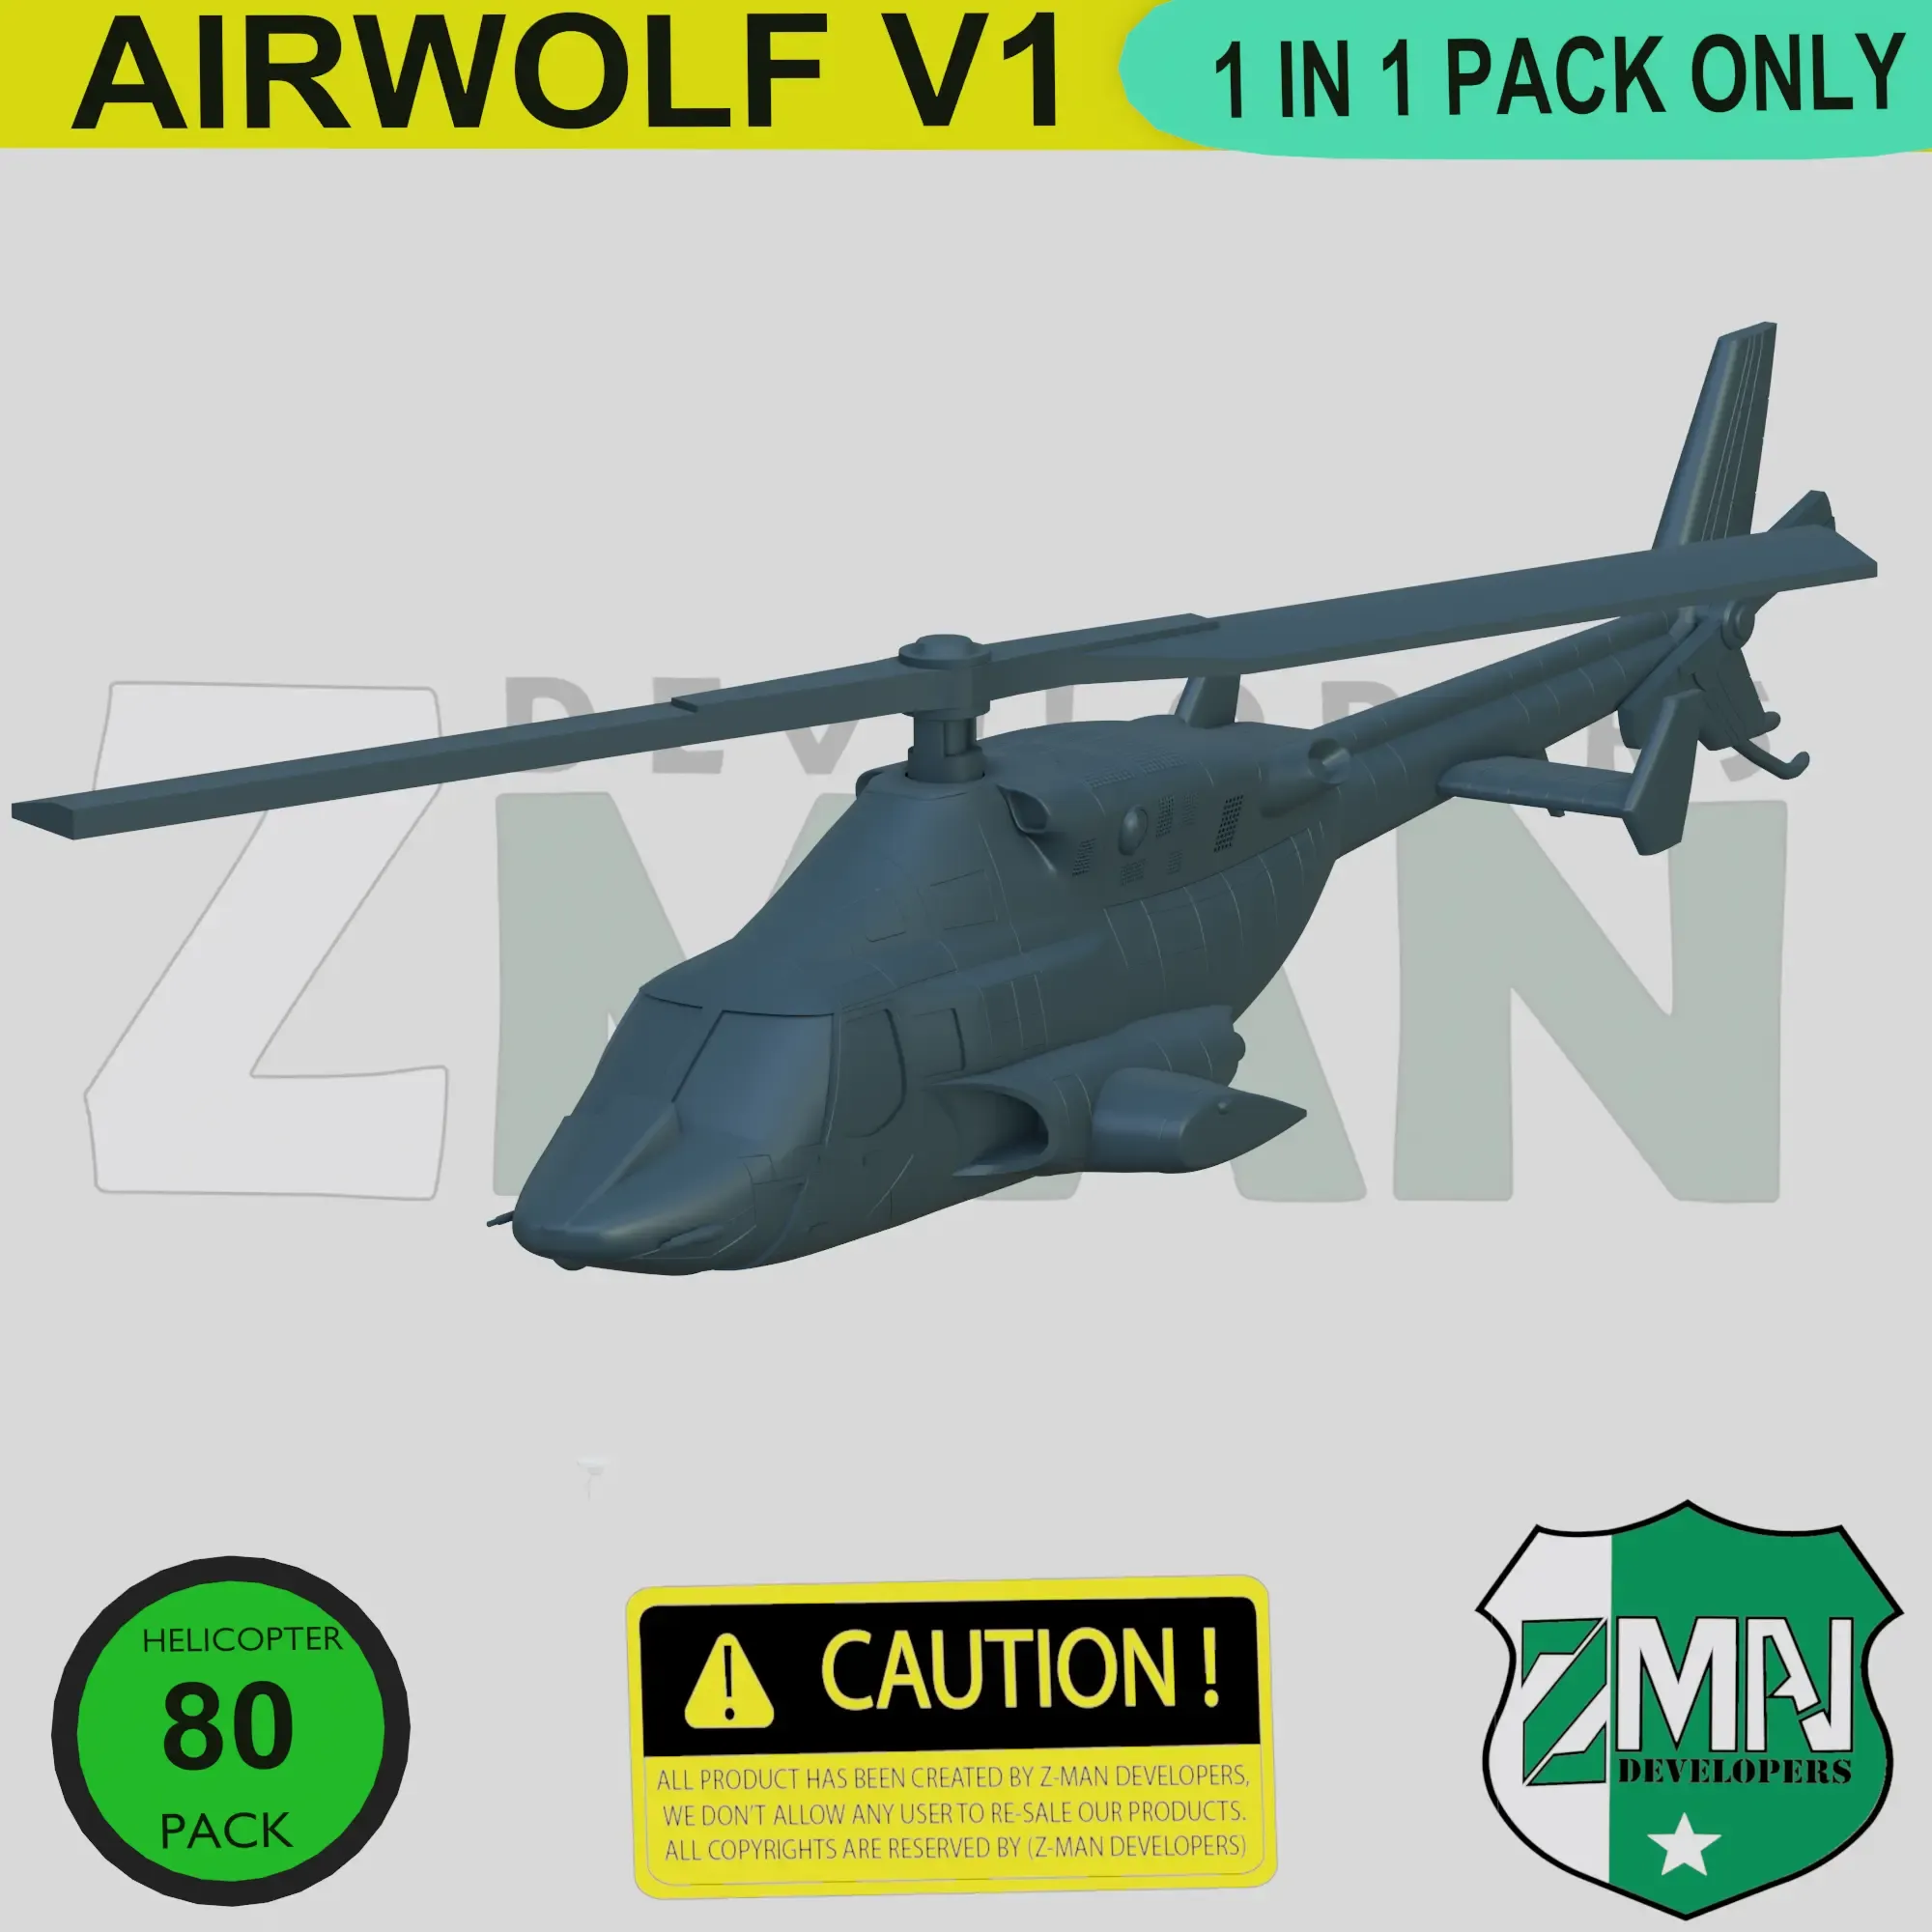 AIRWOLF HELICOPTER V1